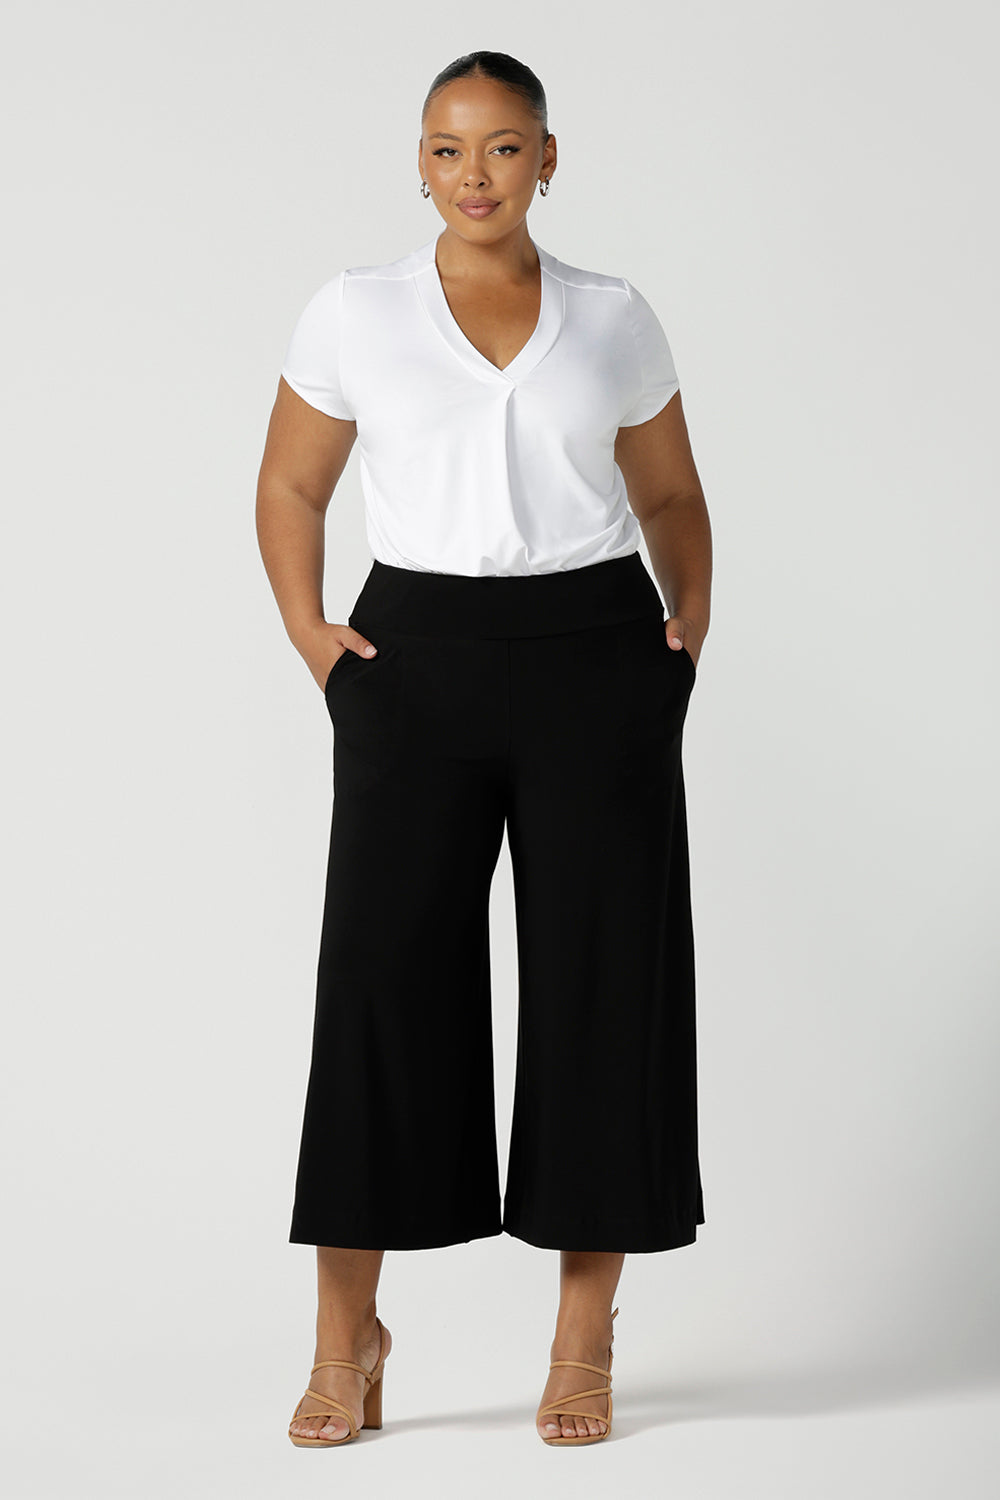 A size 18, plus size size woman wears a short sleeve, V neck top in white bamboo jersey with wide leg, black culotte pants. A great top for plus size women, the tailored pleat below the V neckline flatters curves. Shop tops made in Australia at women's clothing brand, Leina & Fleur.